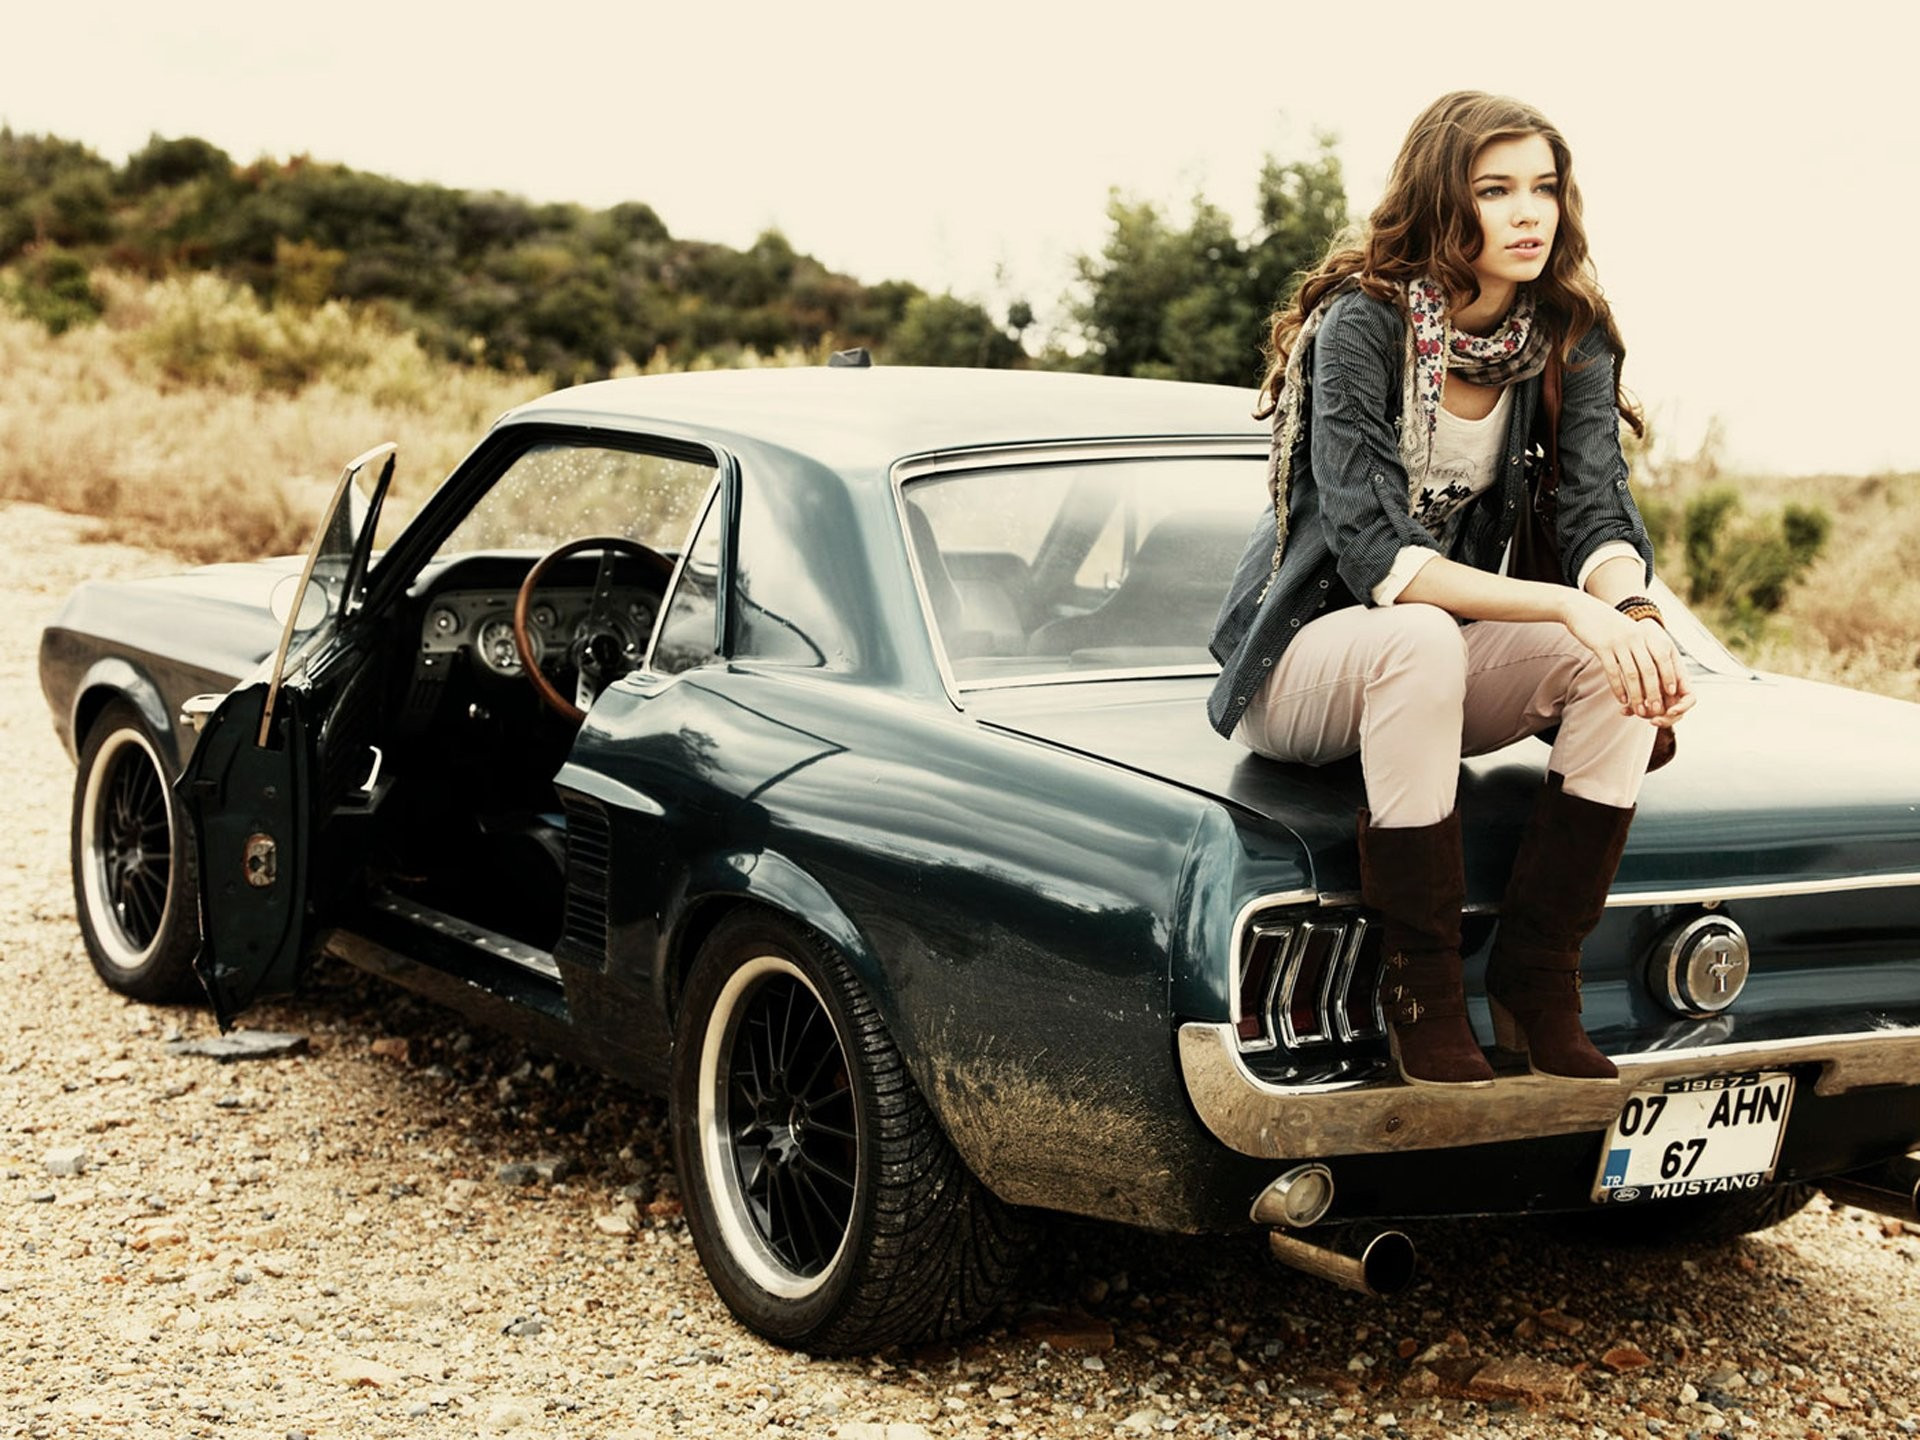 Dark-haired girl sitting on the trunk of a mustang